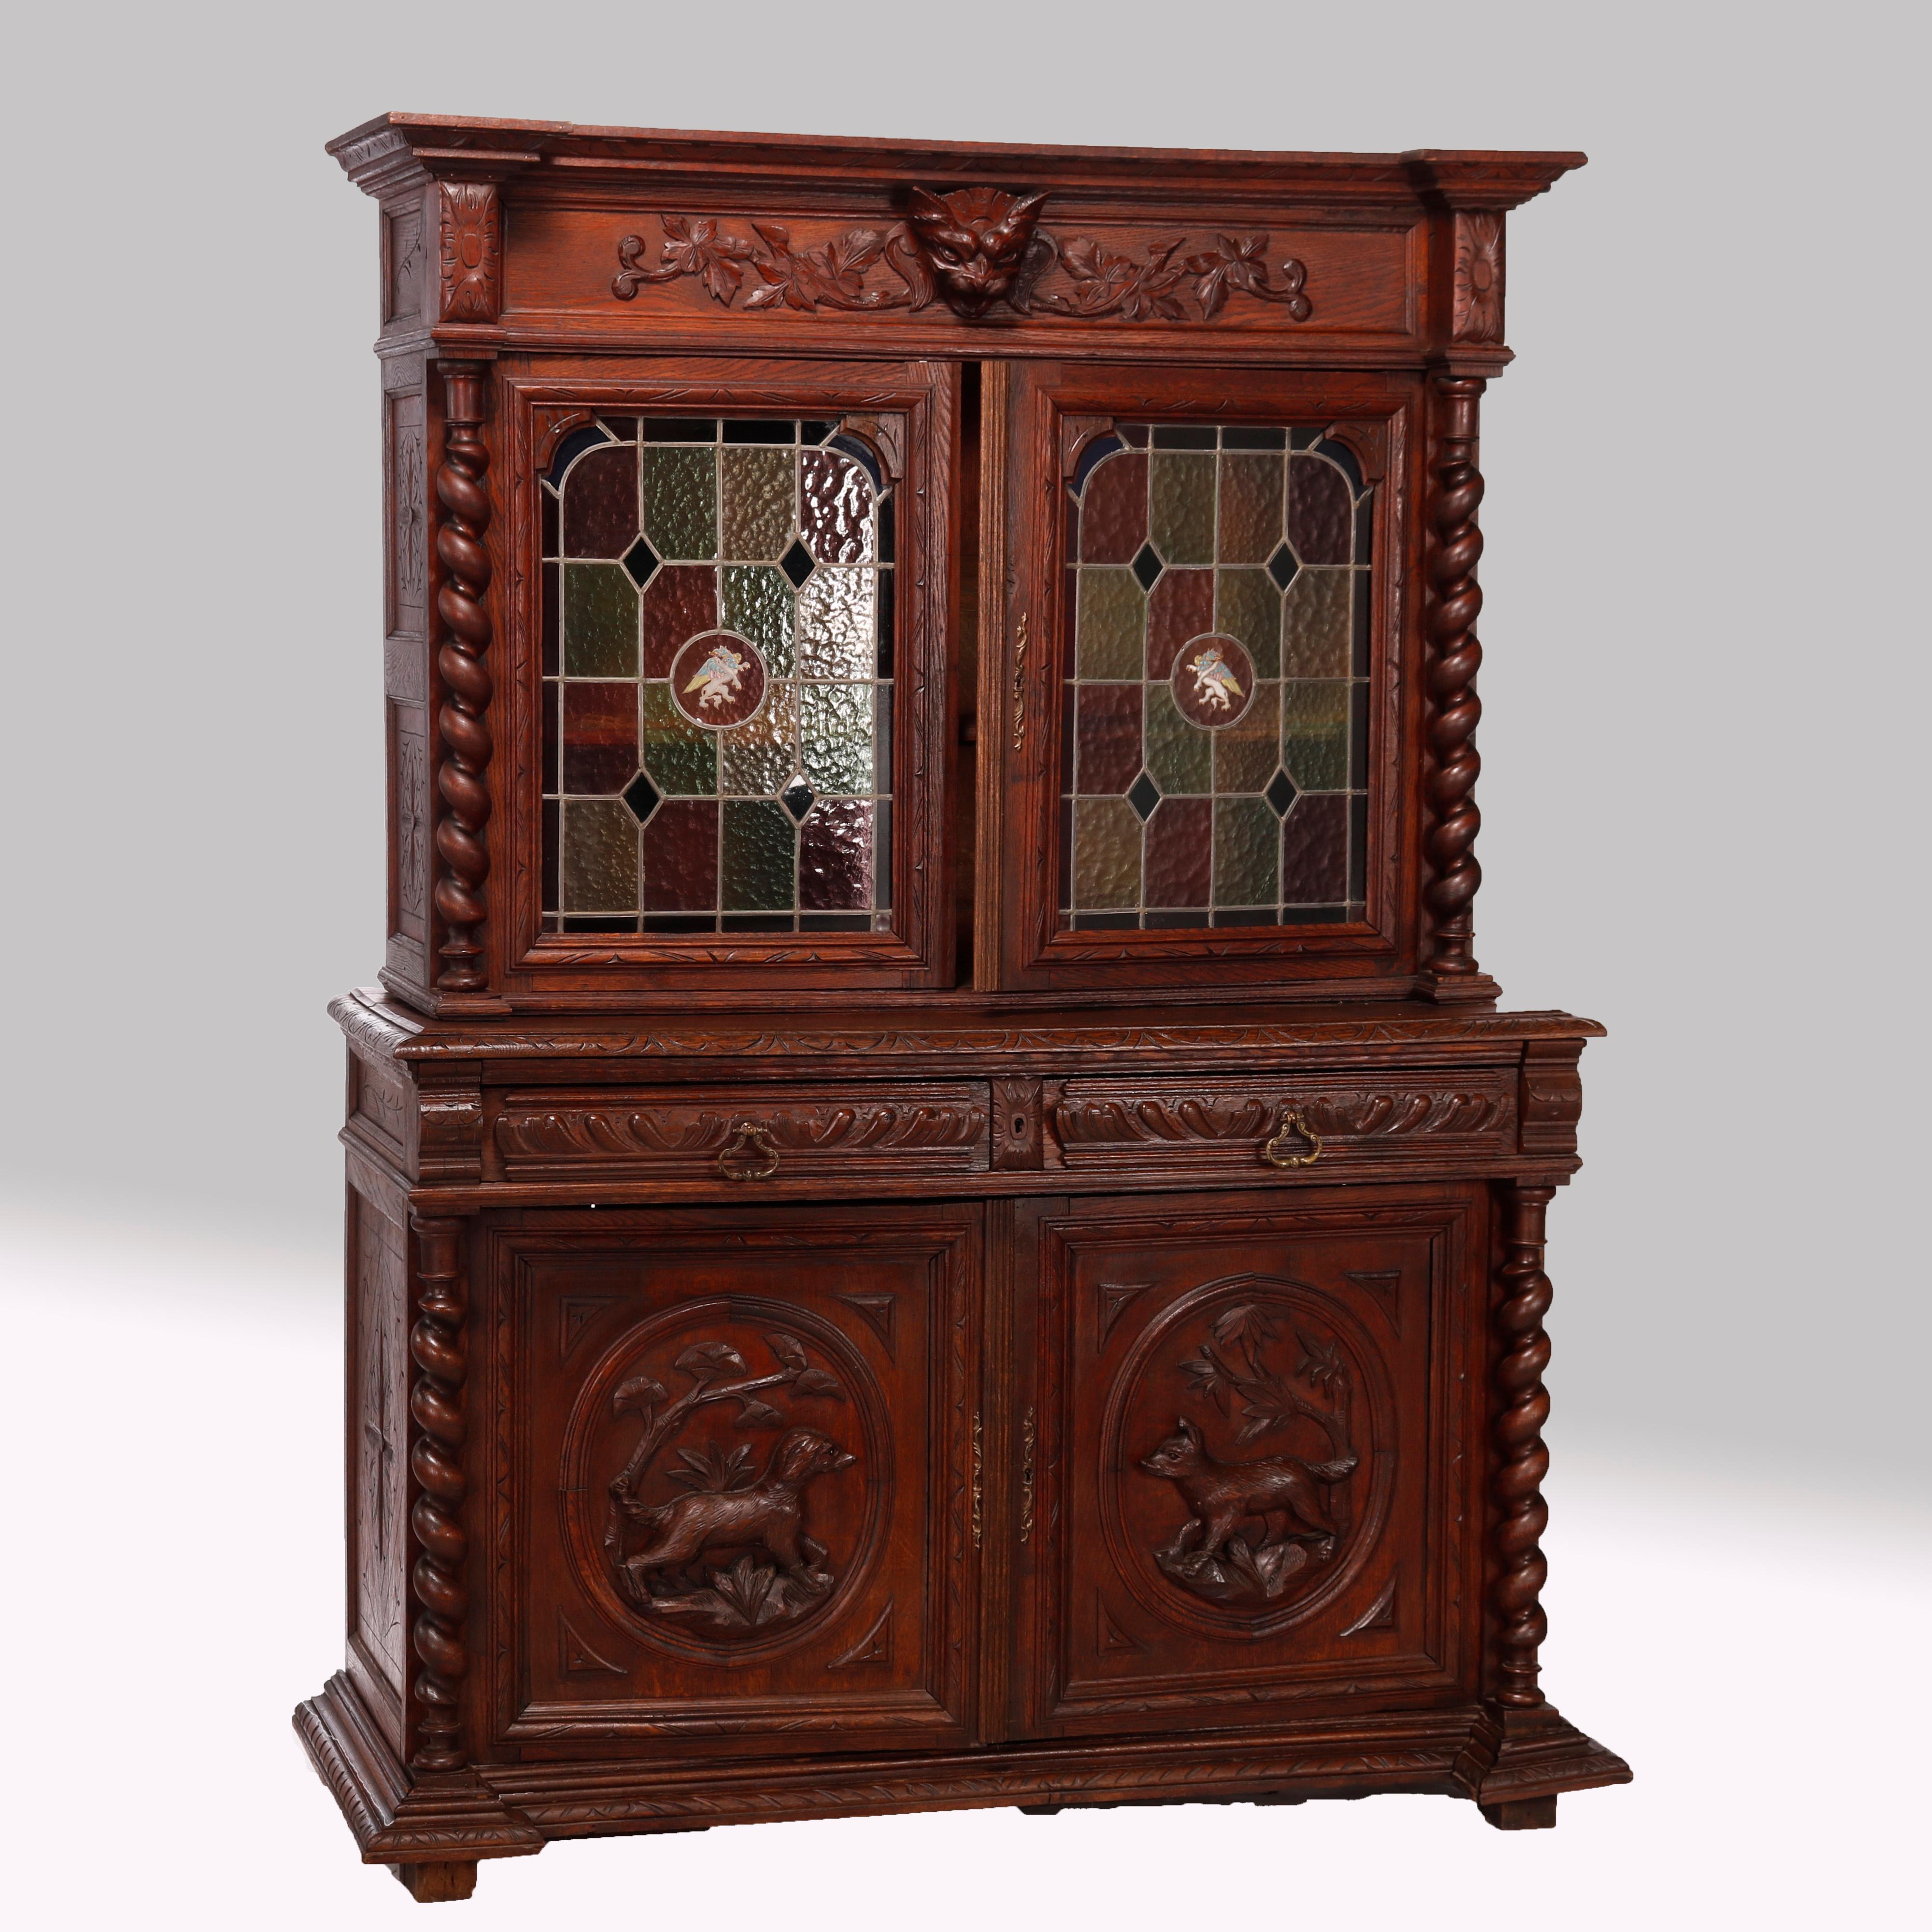 An antique German figural hunt cupboard in the manner of Black Forest, offers oak construction with upper having carved figural mask with flanking foliate elements over double leaded glass door cabinet with central enameled phoenix, flanking rope